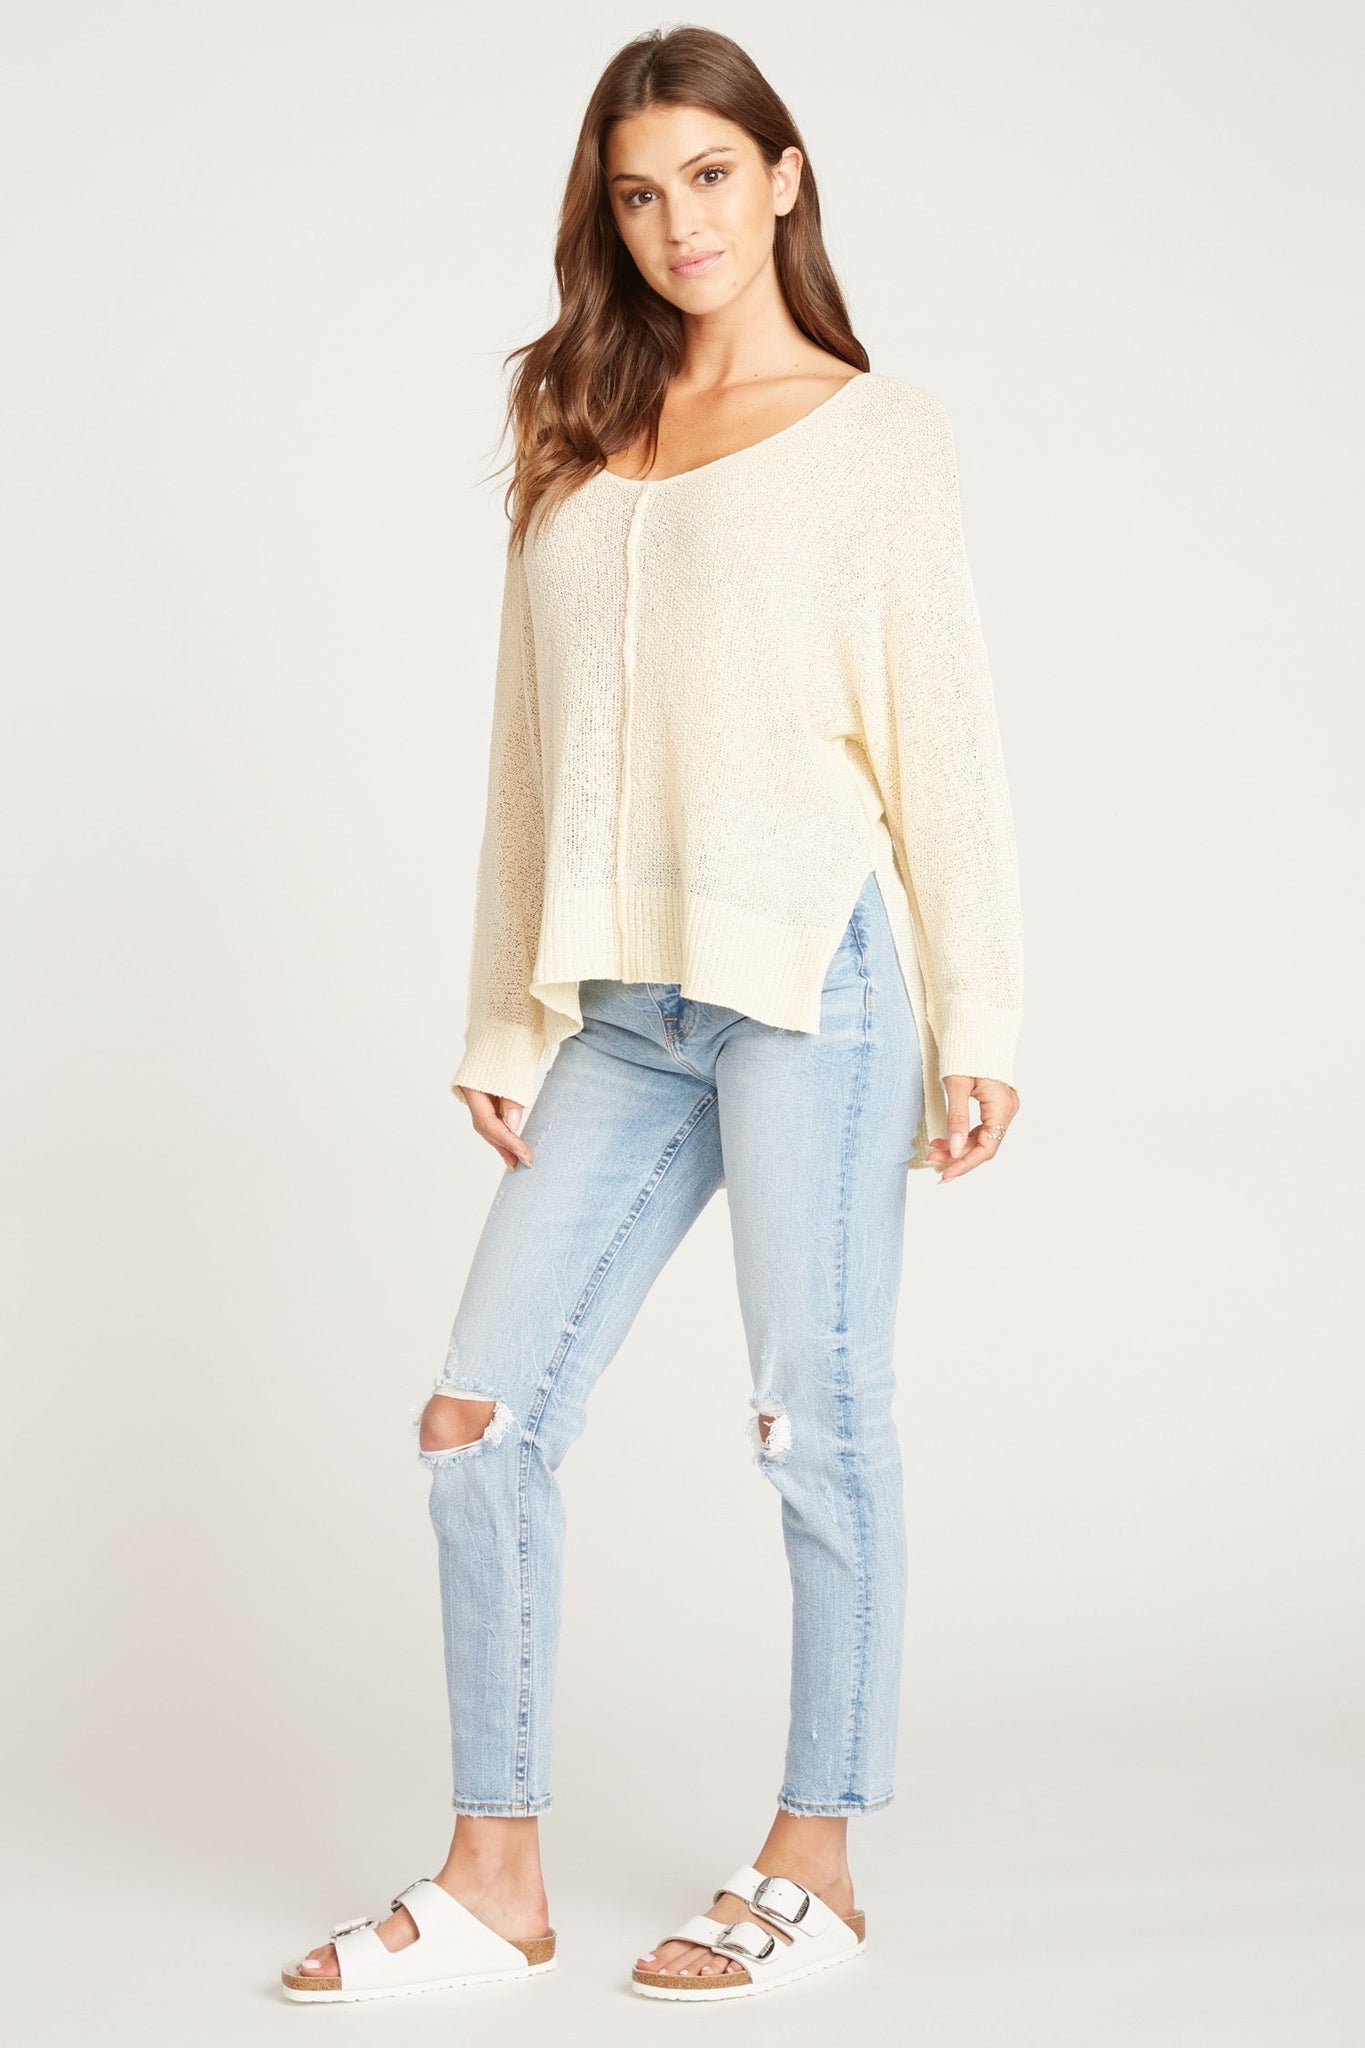 Load image into Gallery viewer, OVERSIZED HIGHLOW SWEATER-BEIGE
